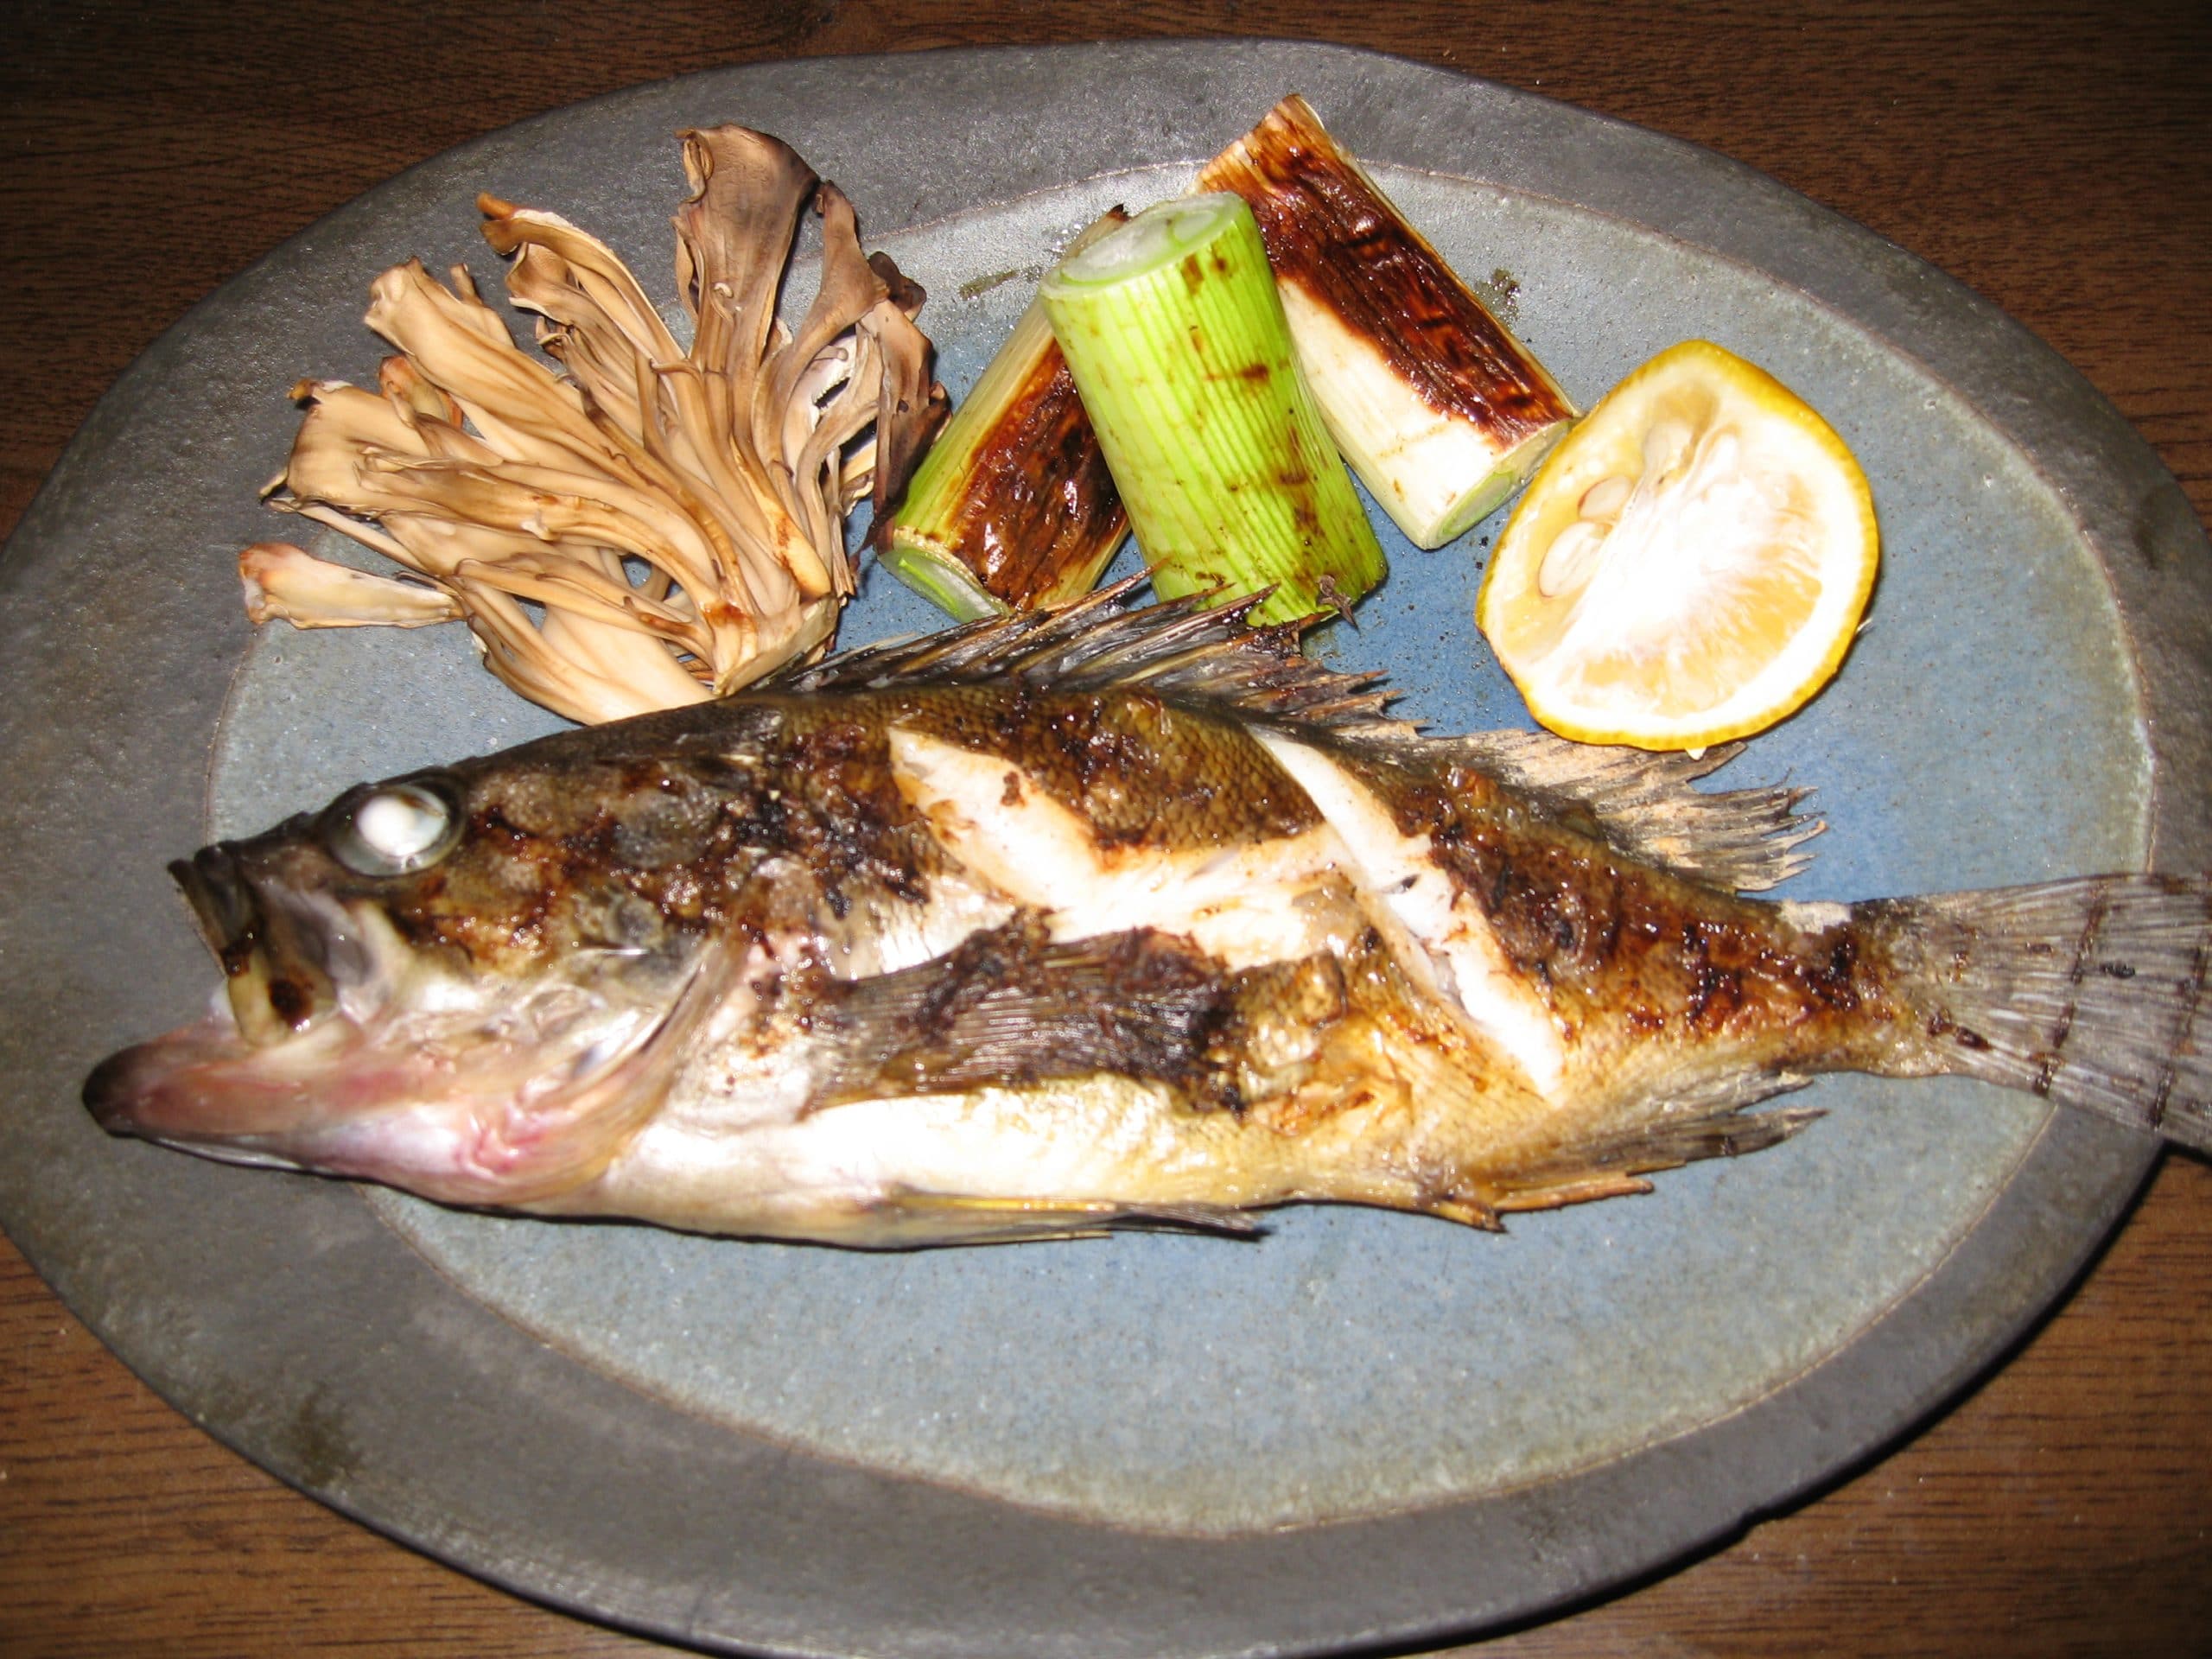 This lemon-infused grilled Rockfish